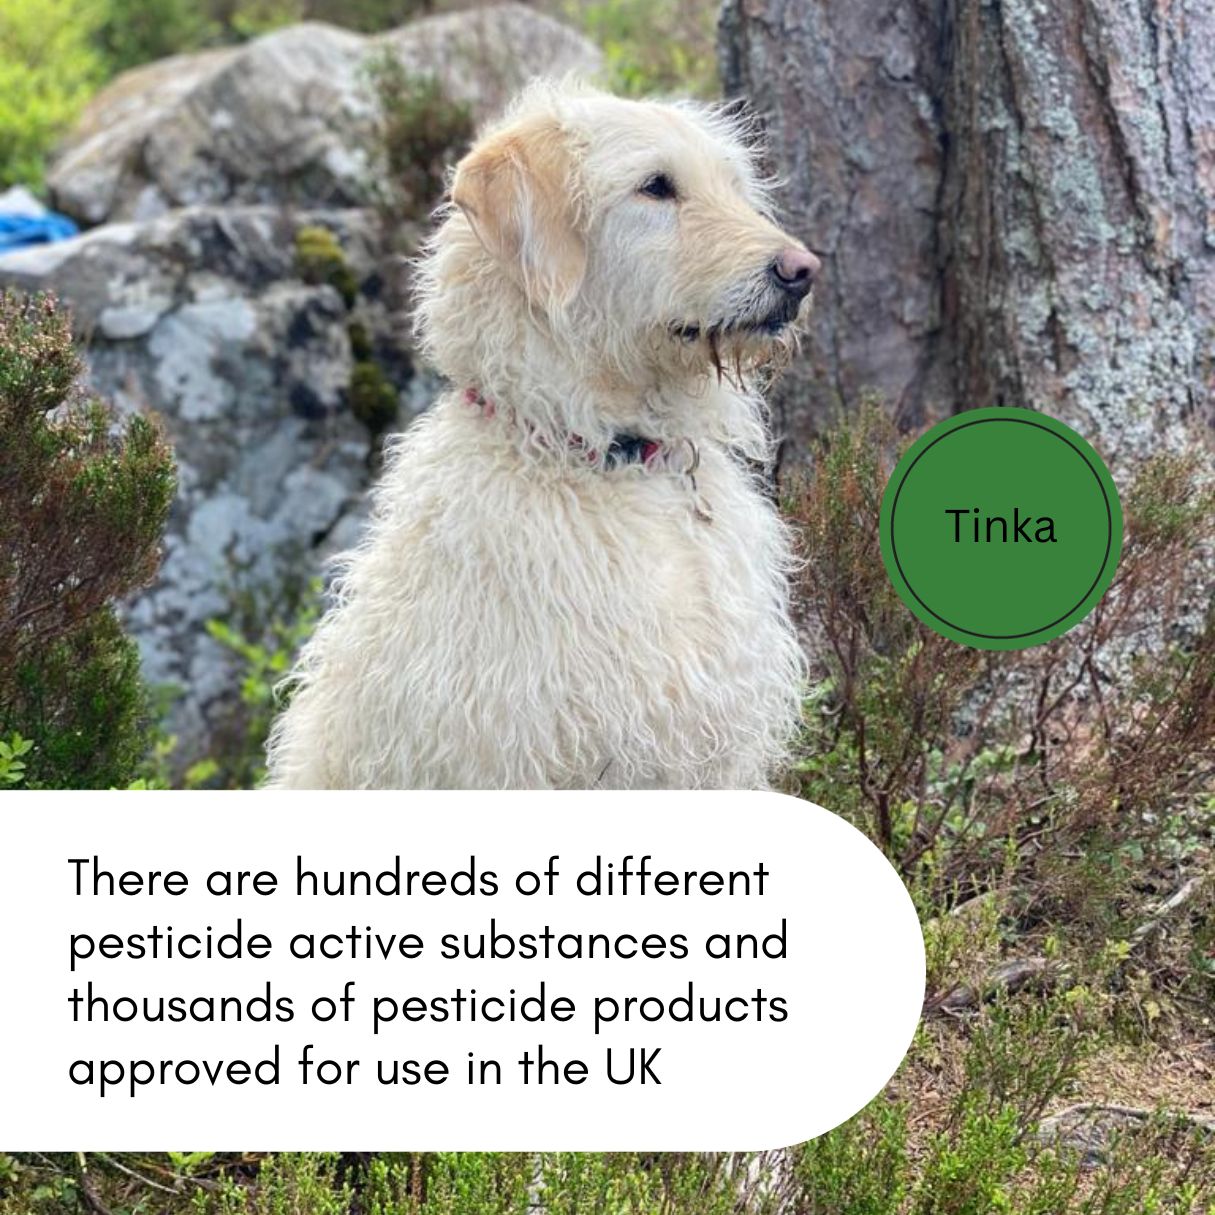 There are thousands of pesticide products approved for use in the UK